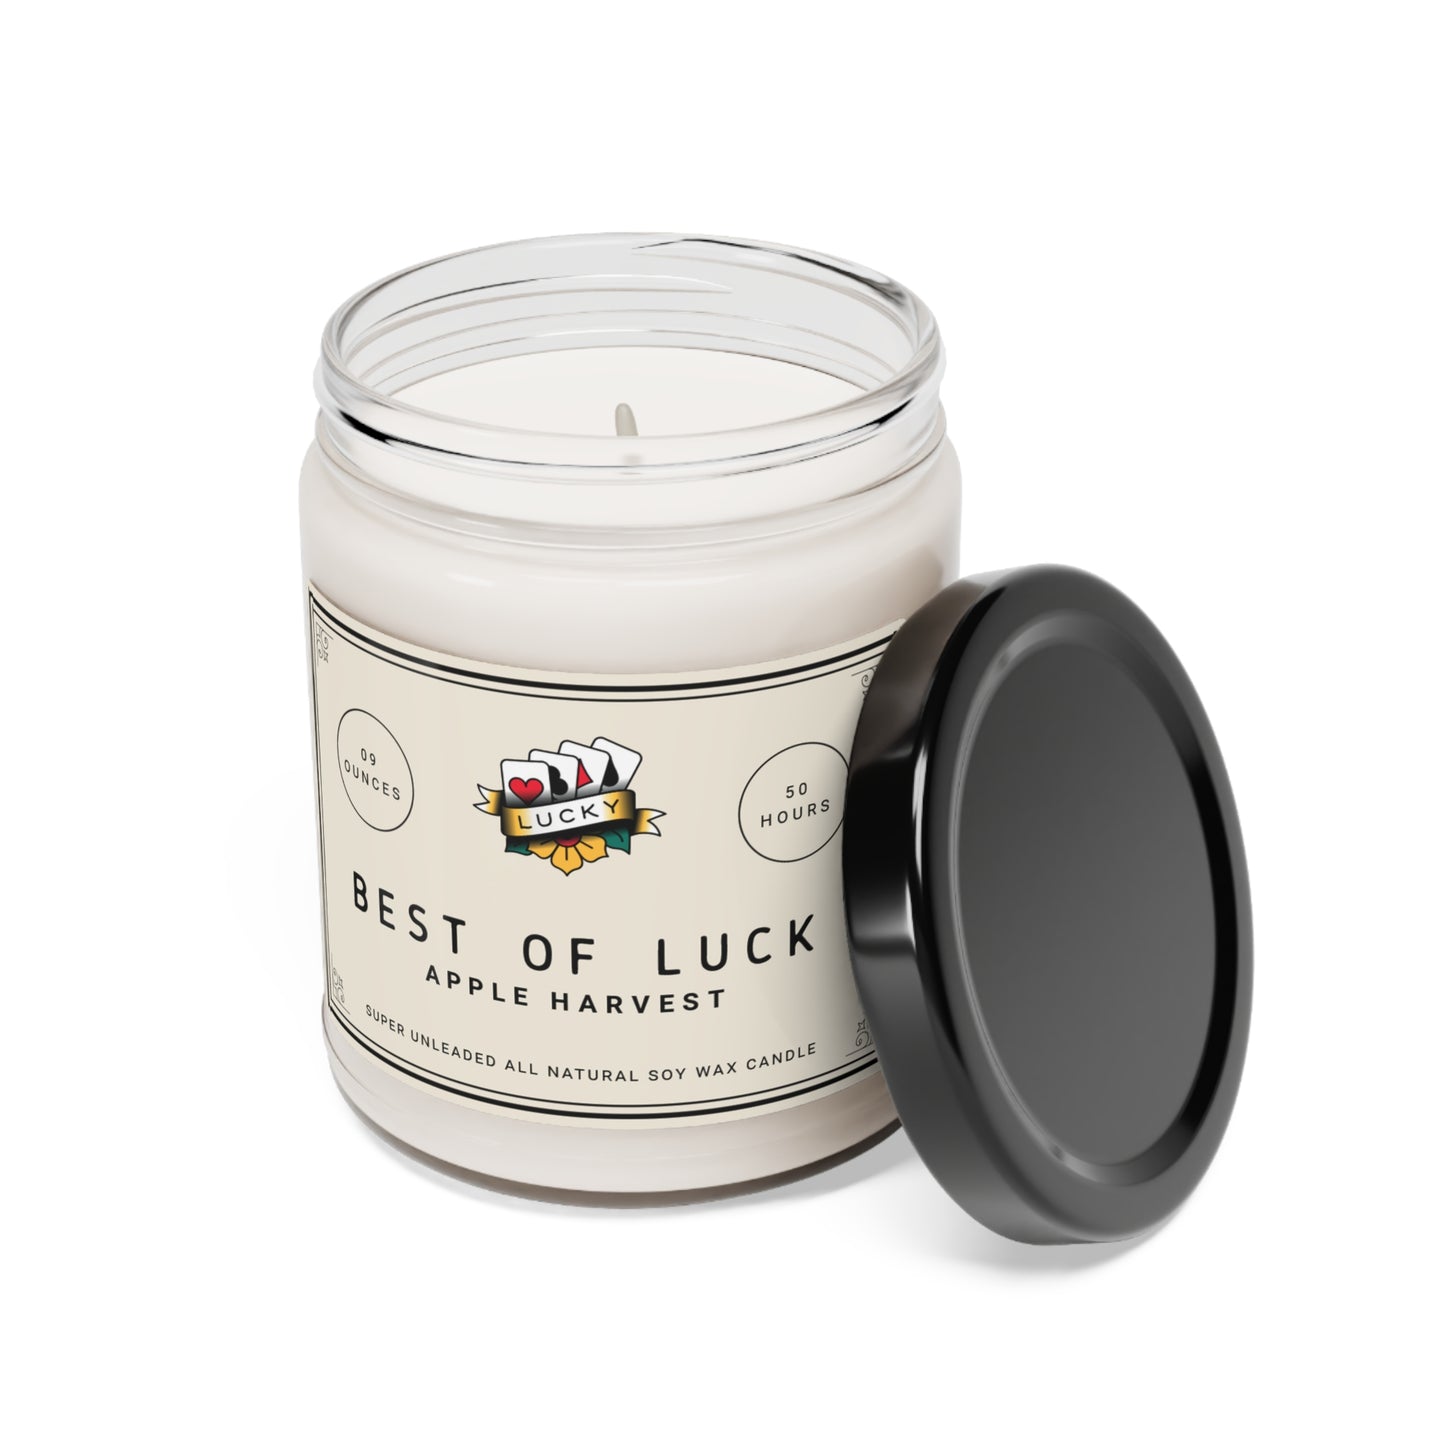 Best of Luck (Apple Harvest) Soy Candle